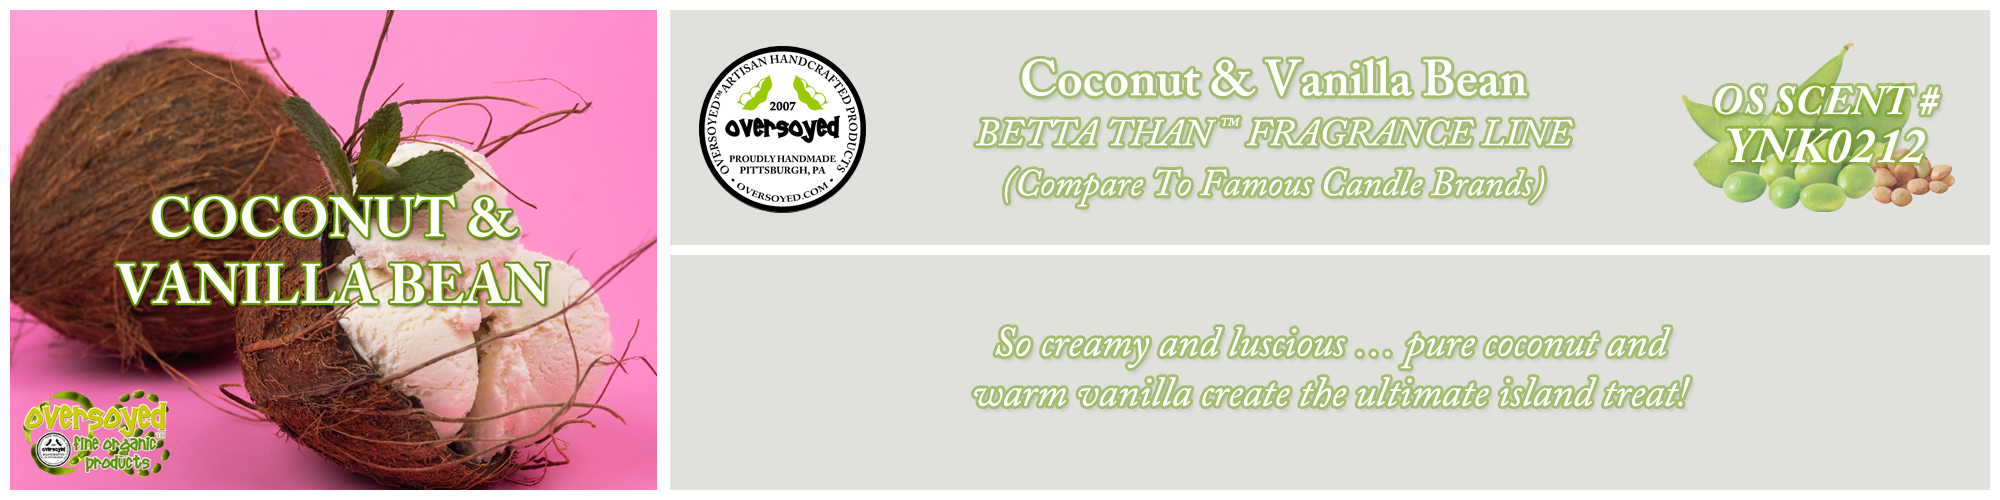 Coconut & Vanilla Bean Handcrafted Products Collection